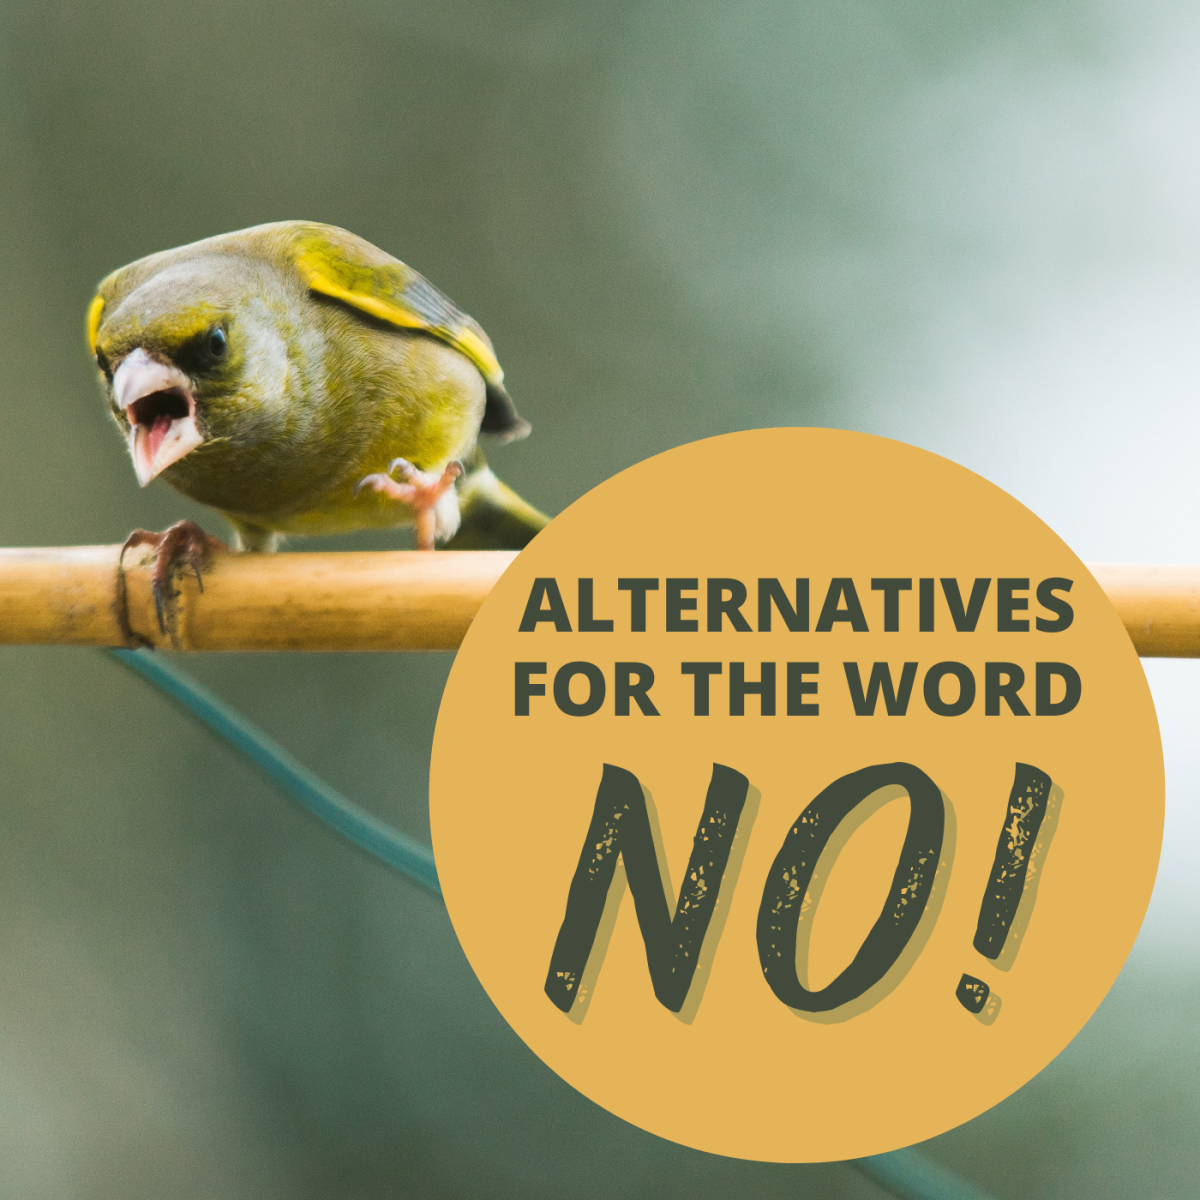 Trying to say "no" in a different way? Use one of these alternatives!